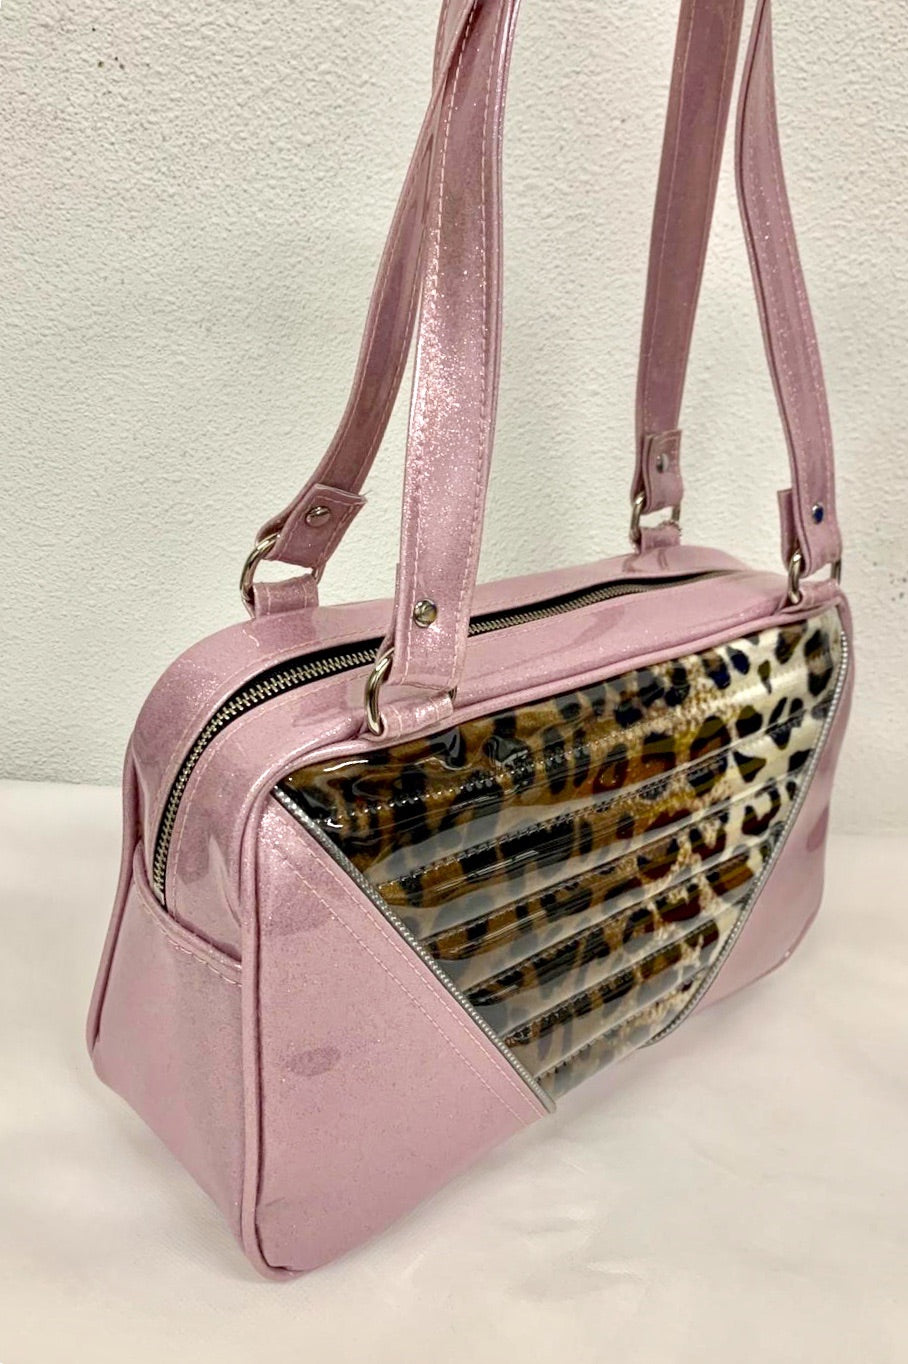 Comet Tote in blush pink glitter vinyl and plush leopard with clear overlay with plush leopard lining handcrafted in California with nickel hardware, an extra set of straps, vinyl zipper pull, inside open divided pocket, zipper pocket with serial number inside and signature Trophy Queen label.